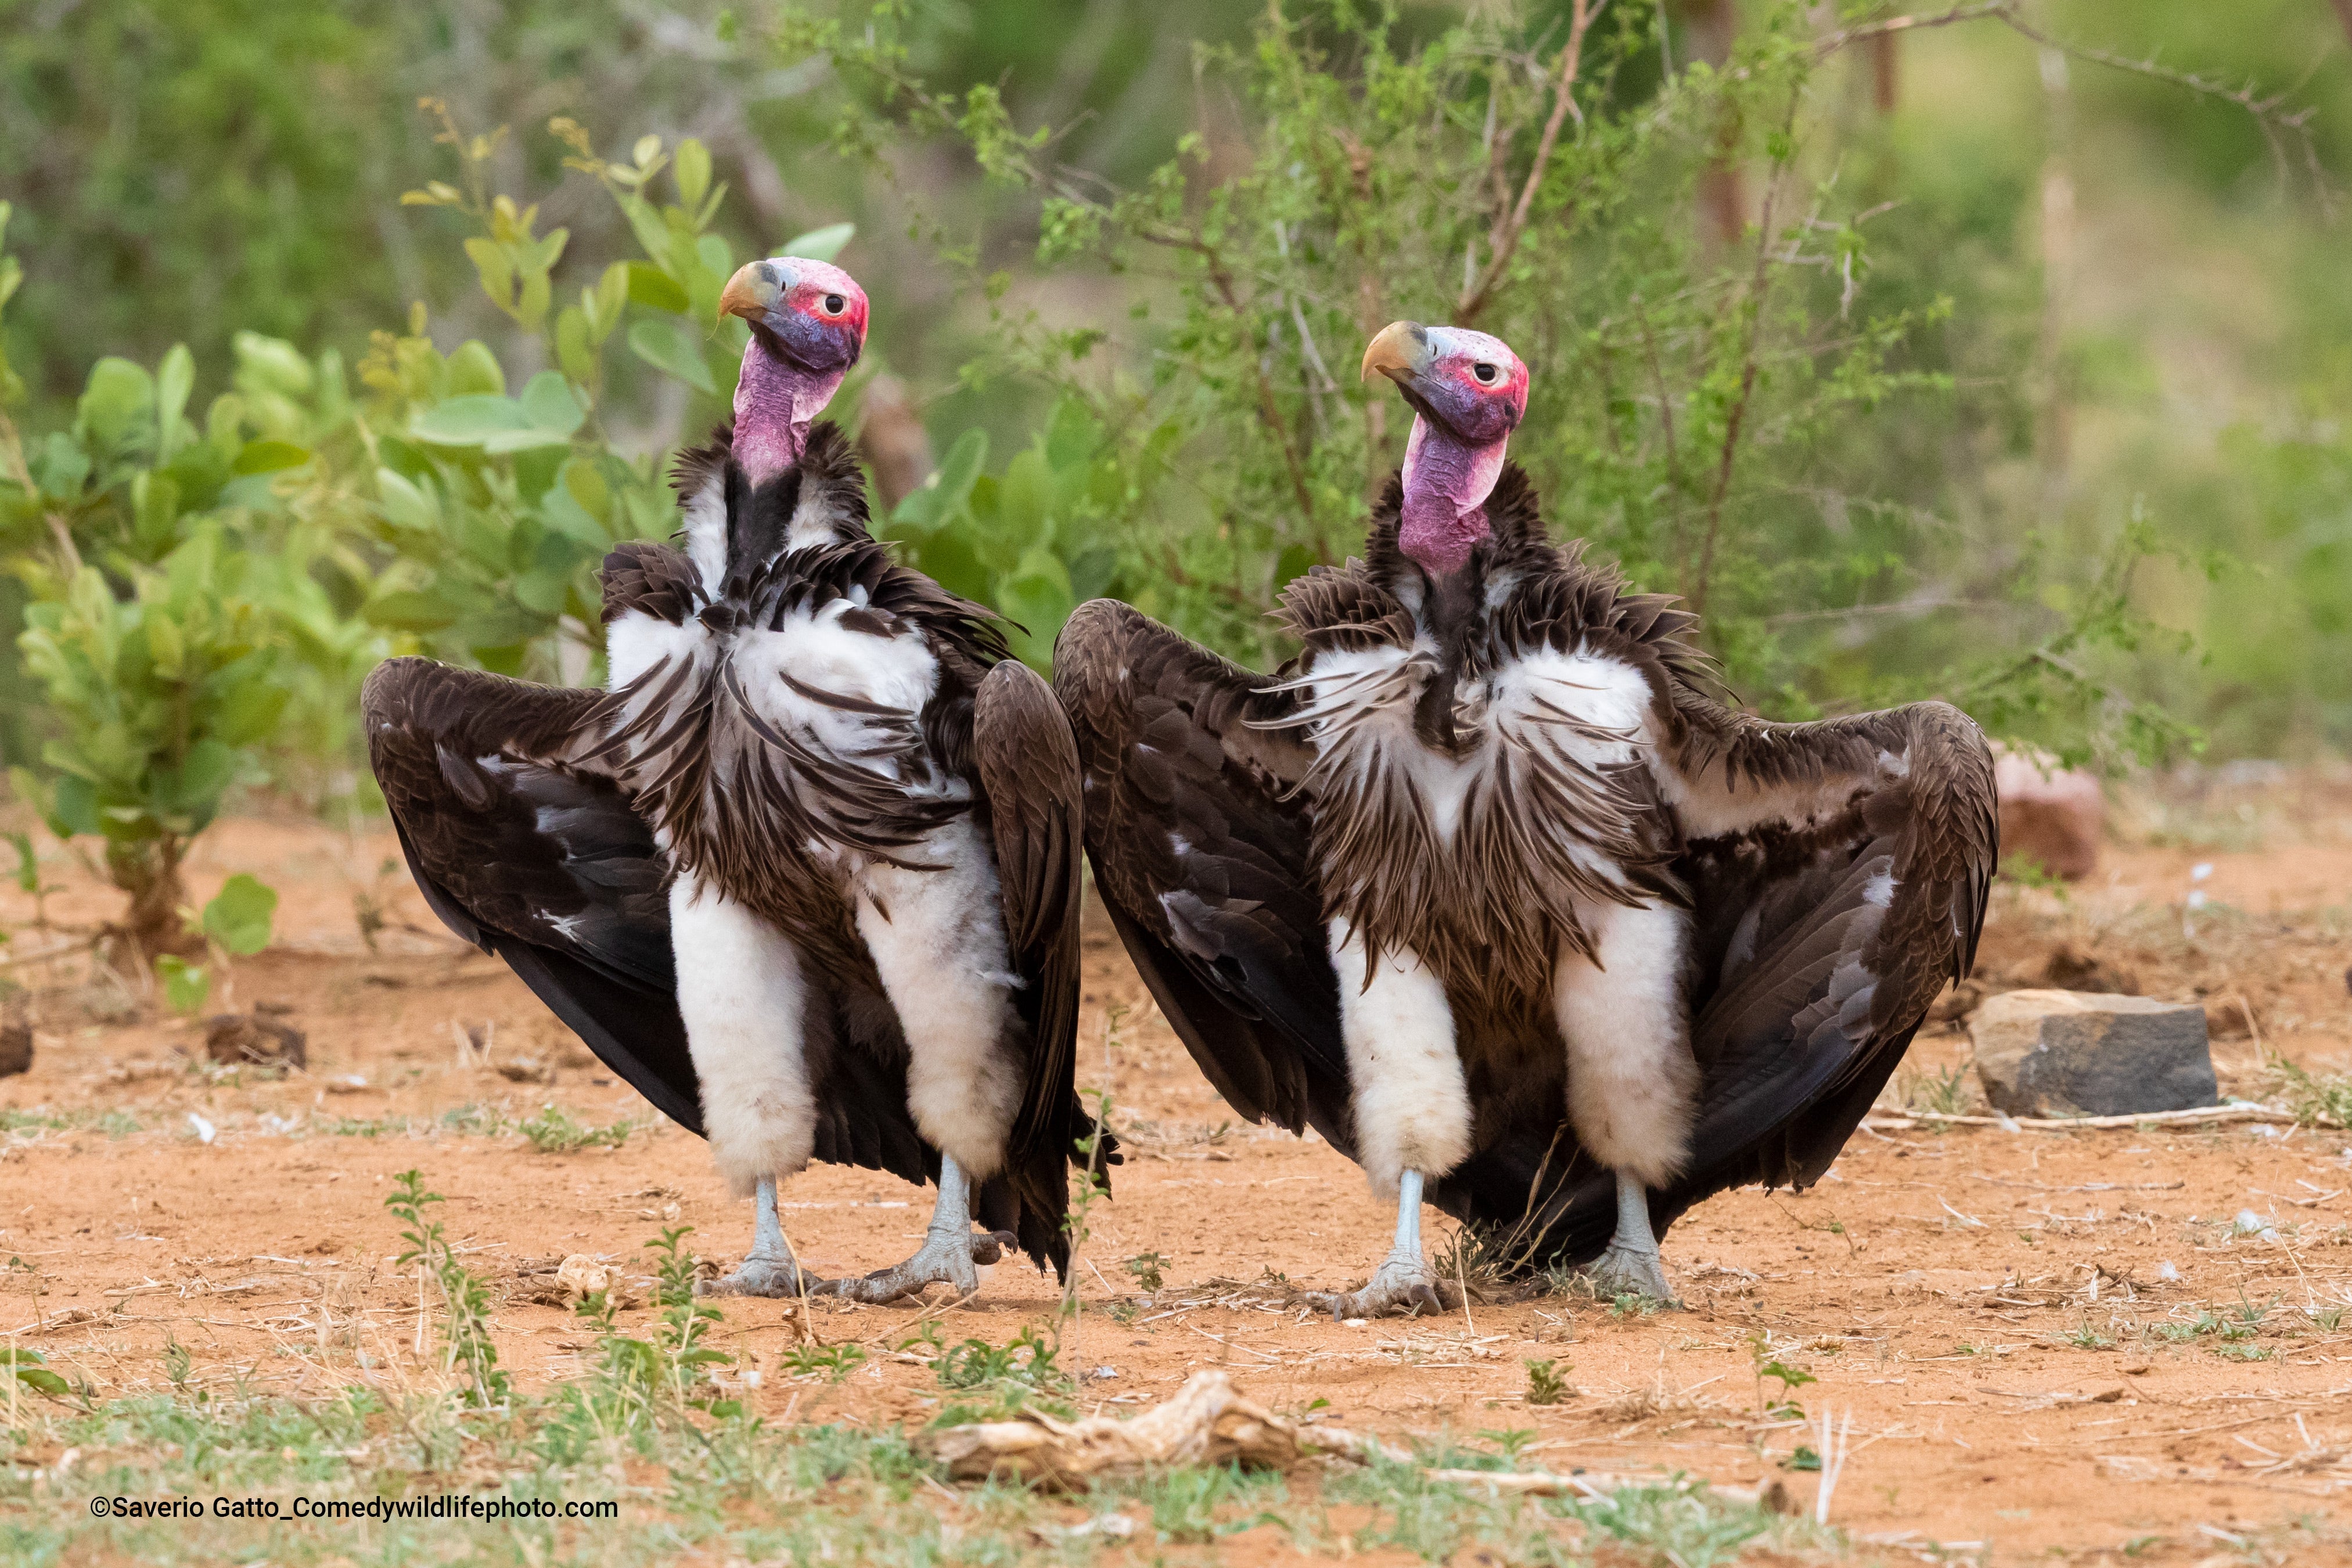 Two lappet-faced vultures display in South Africa. (Photo: © Saverio Gatto / Comedywildlifephoto.com.)